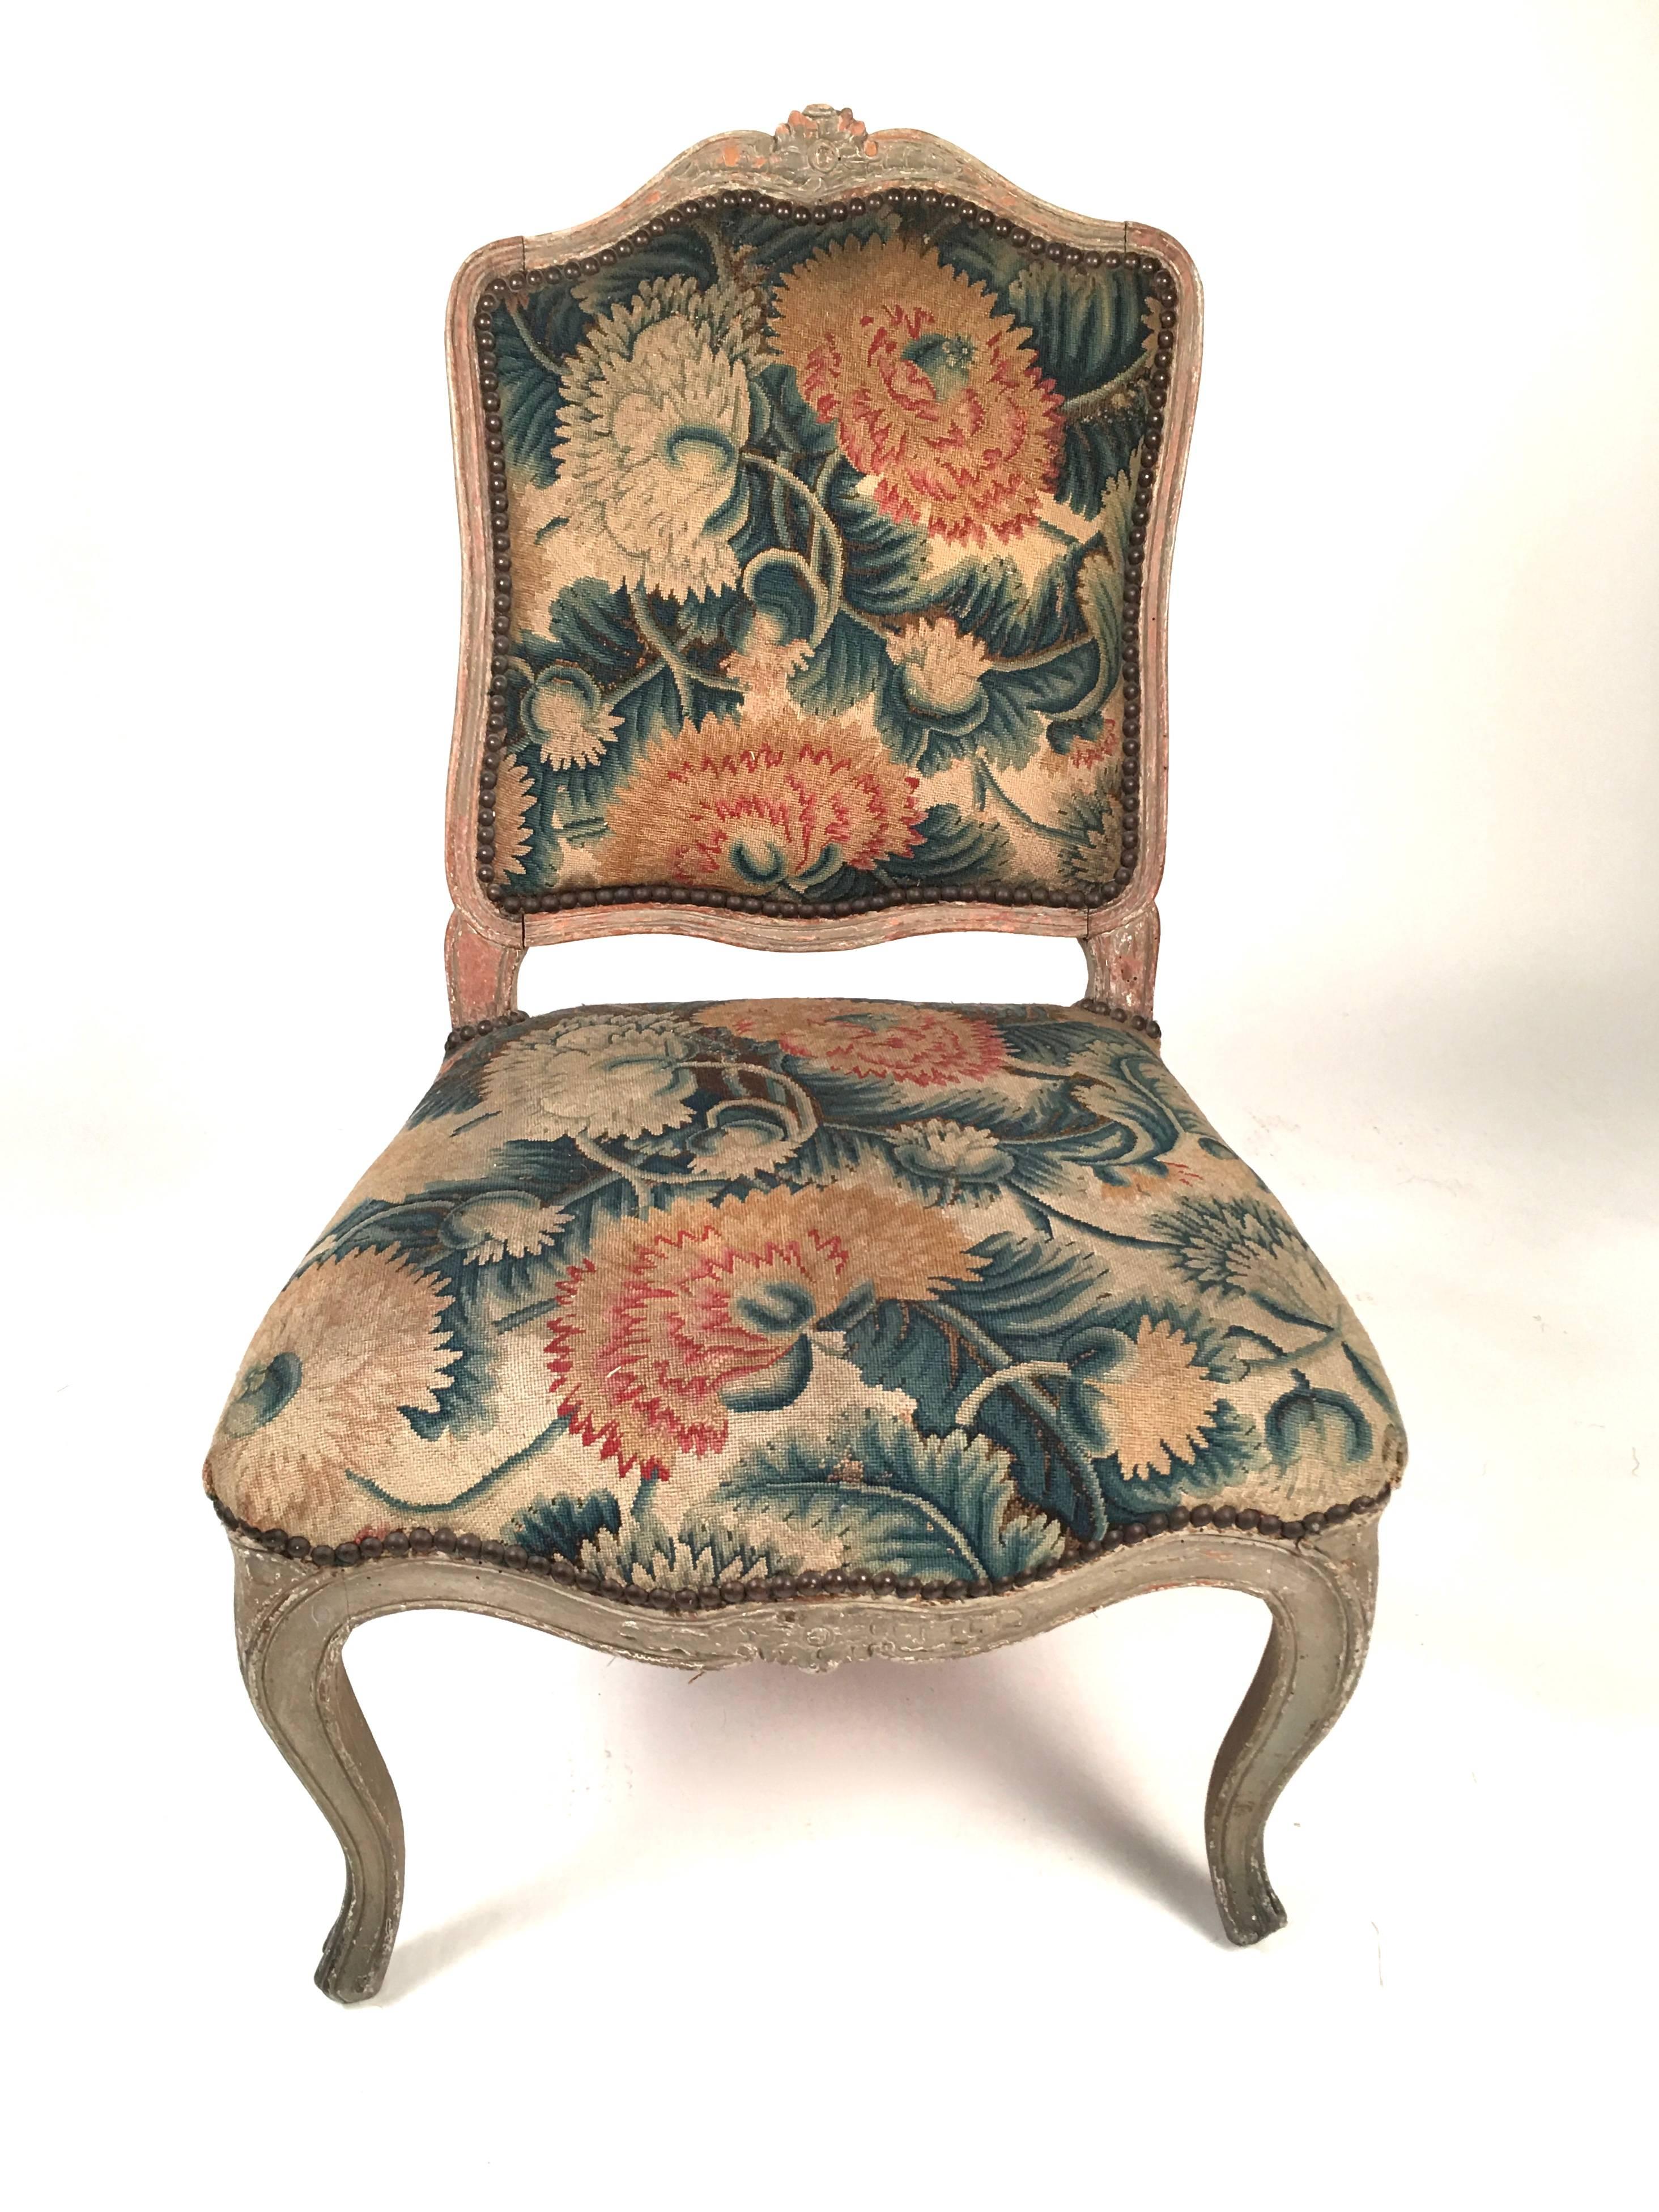 Carved Set of Four French Louis XV Chairs with Period Floral Needlework Upholstery